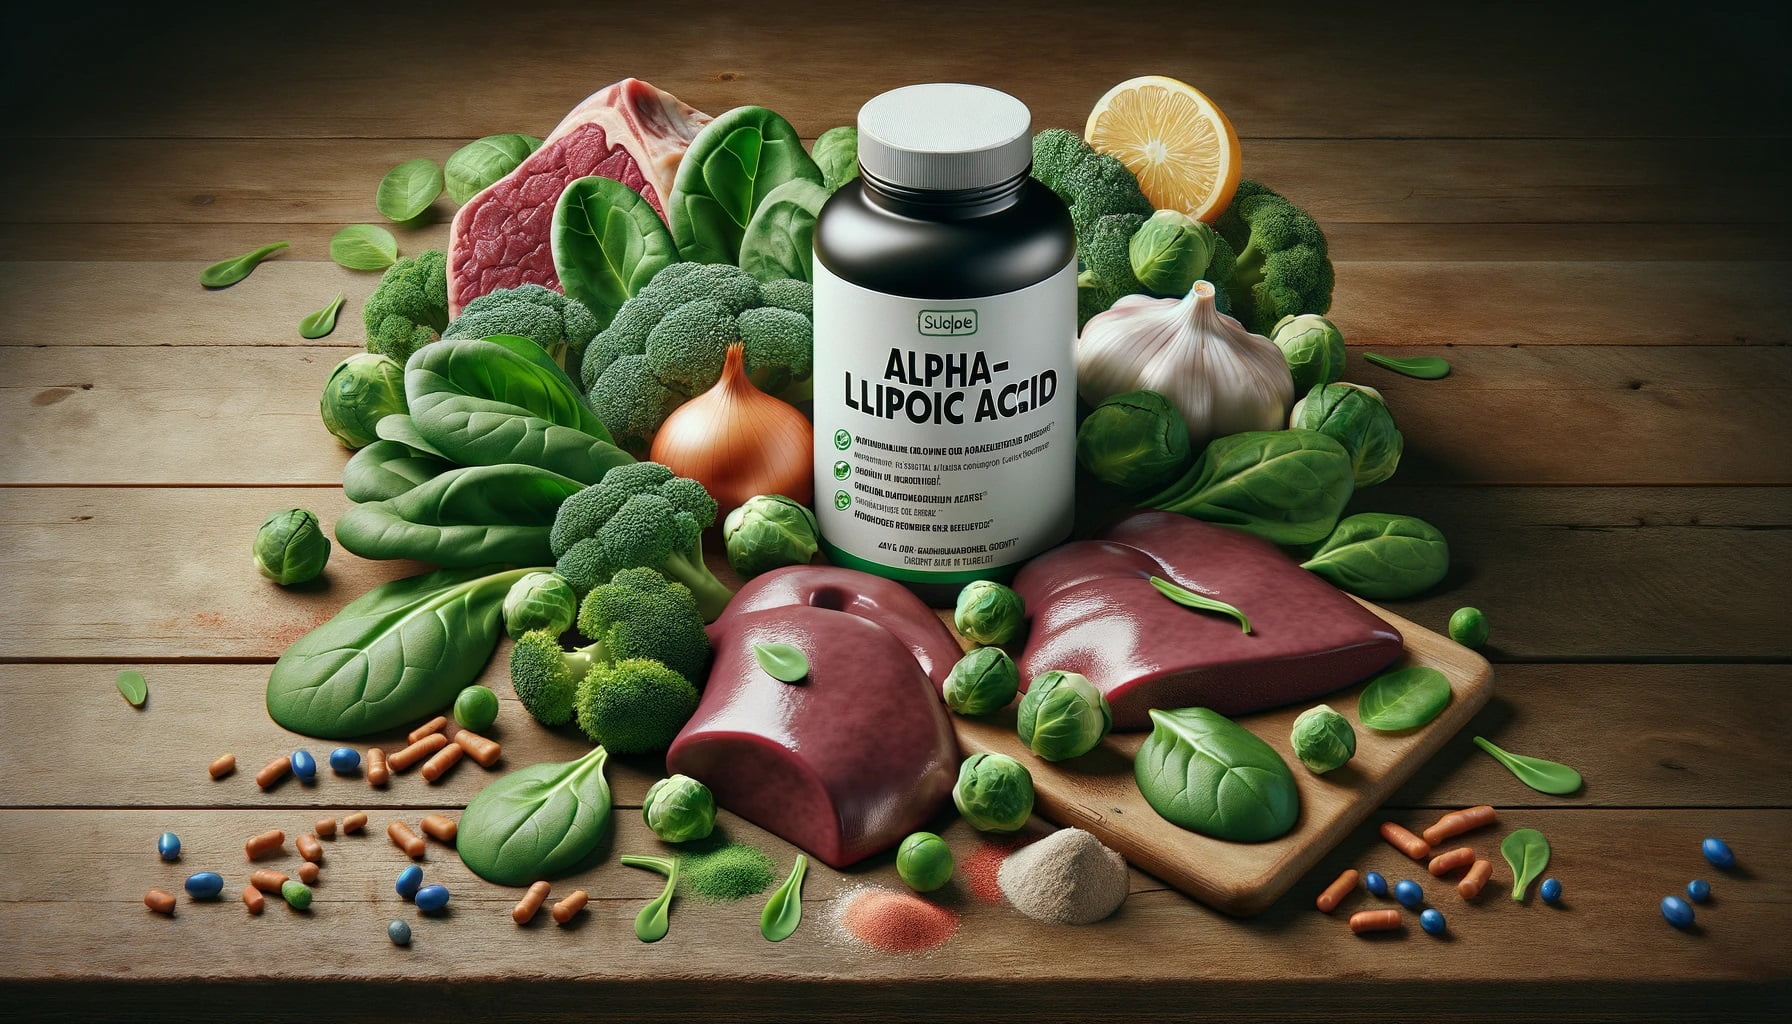 Alpha-Lipoic Acid supplement bottle surrounded by natural sources